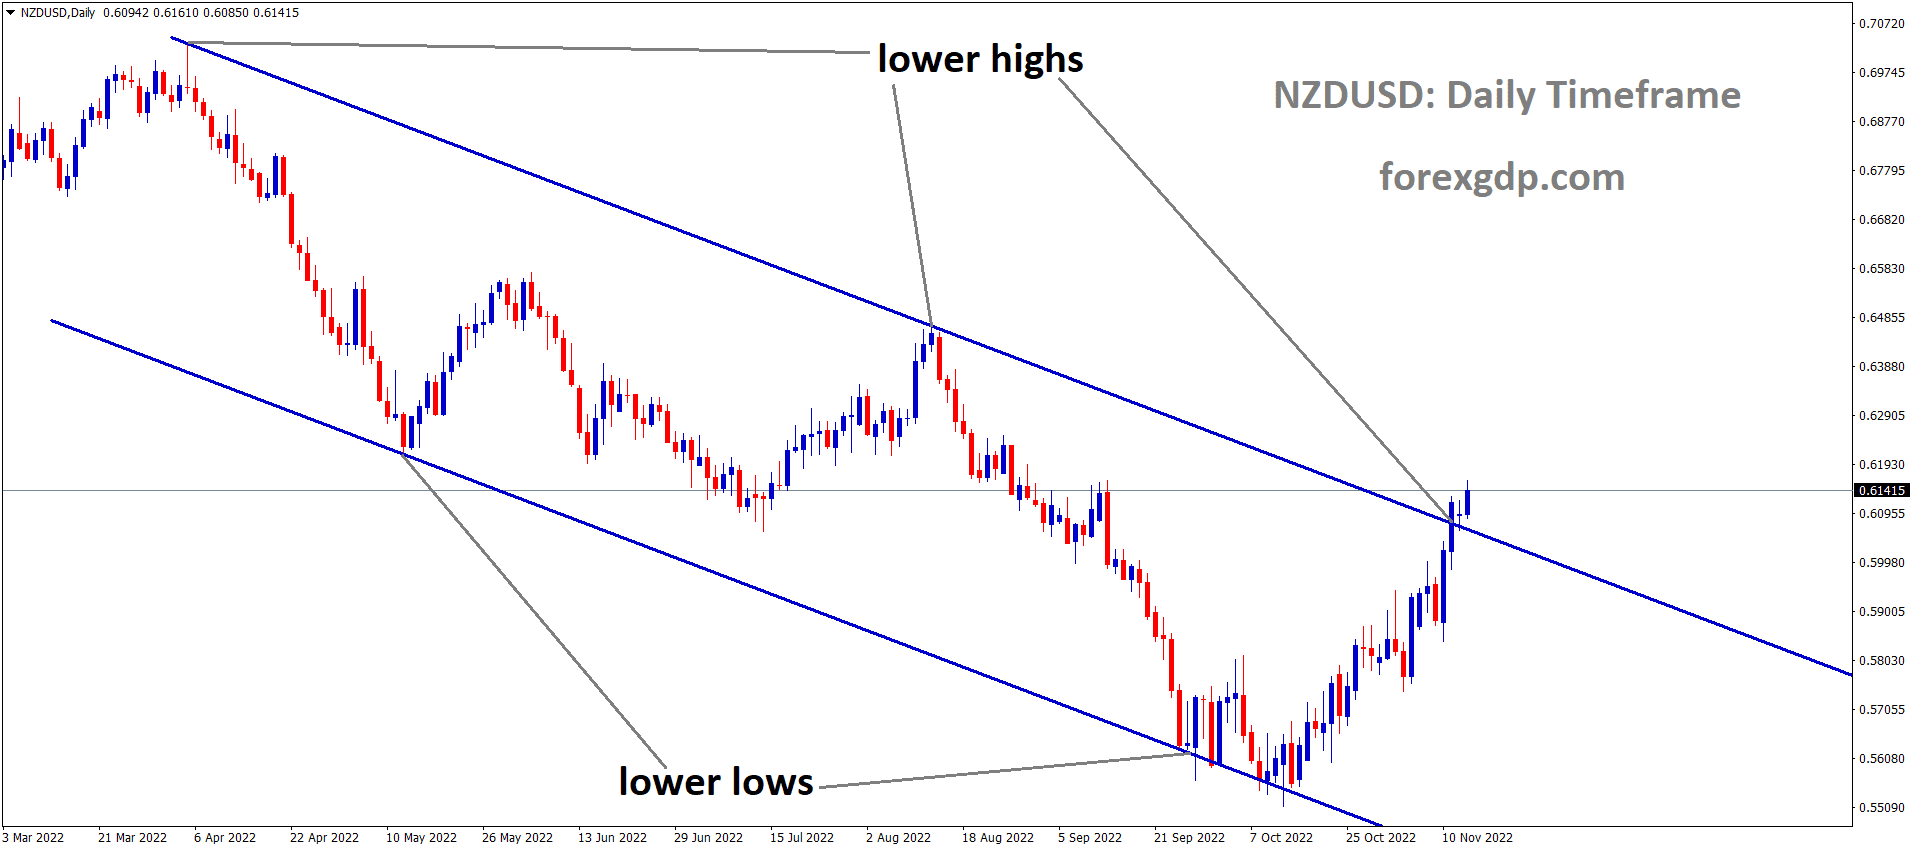 NZDUSD is moving in the descending channel and the market has reached the lower high area of the channel 1